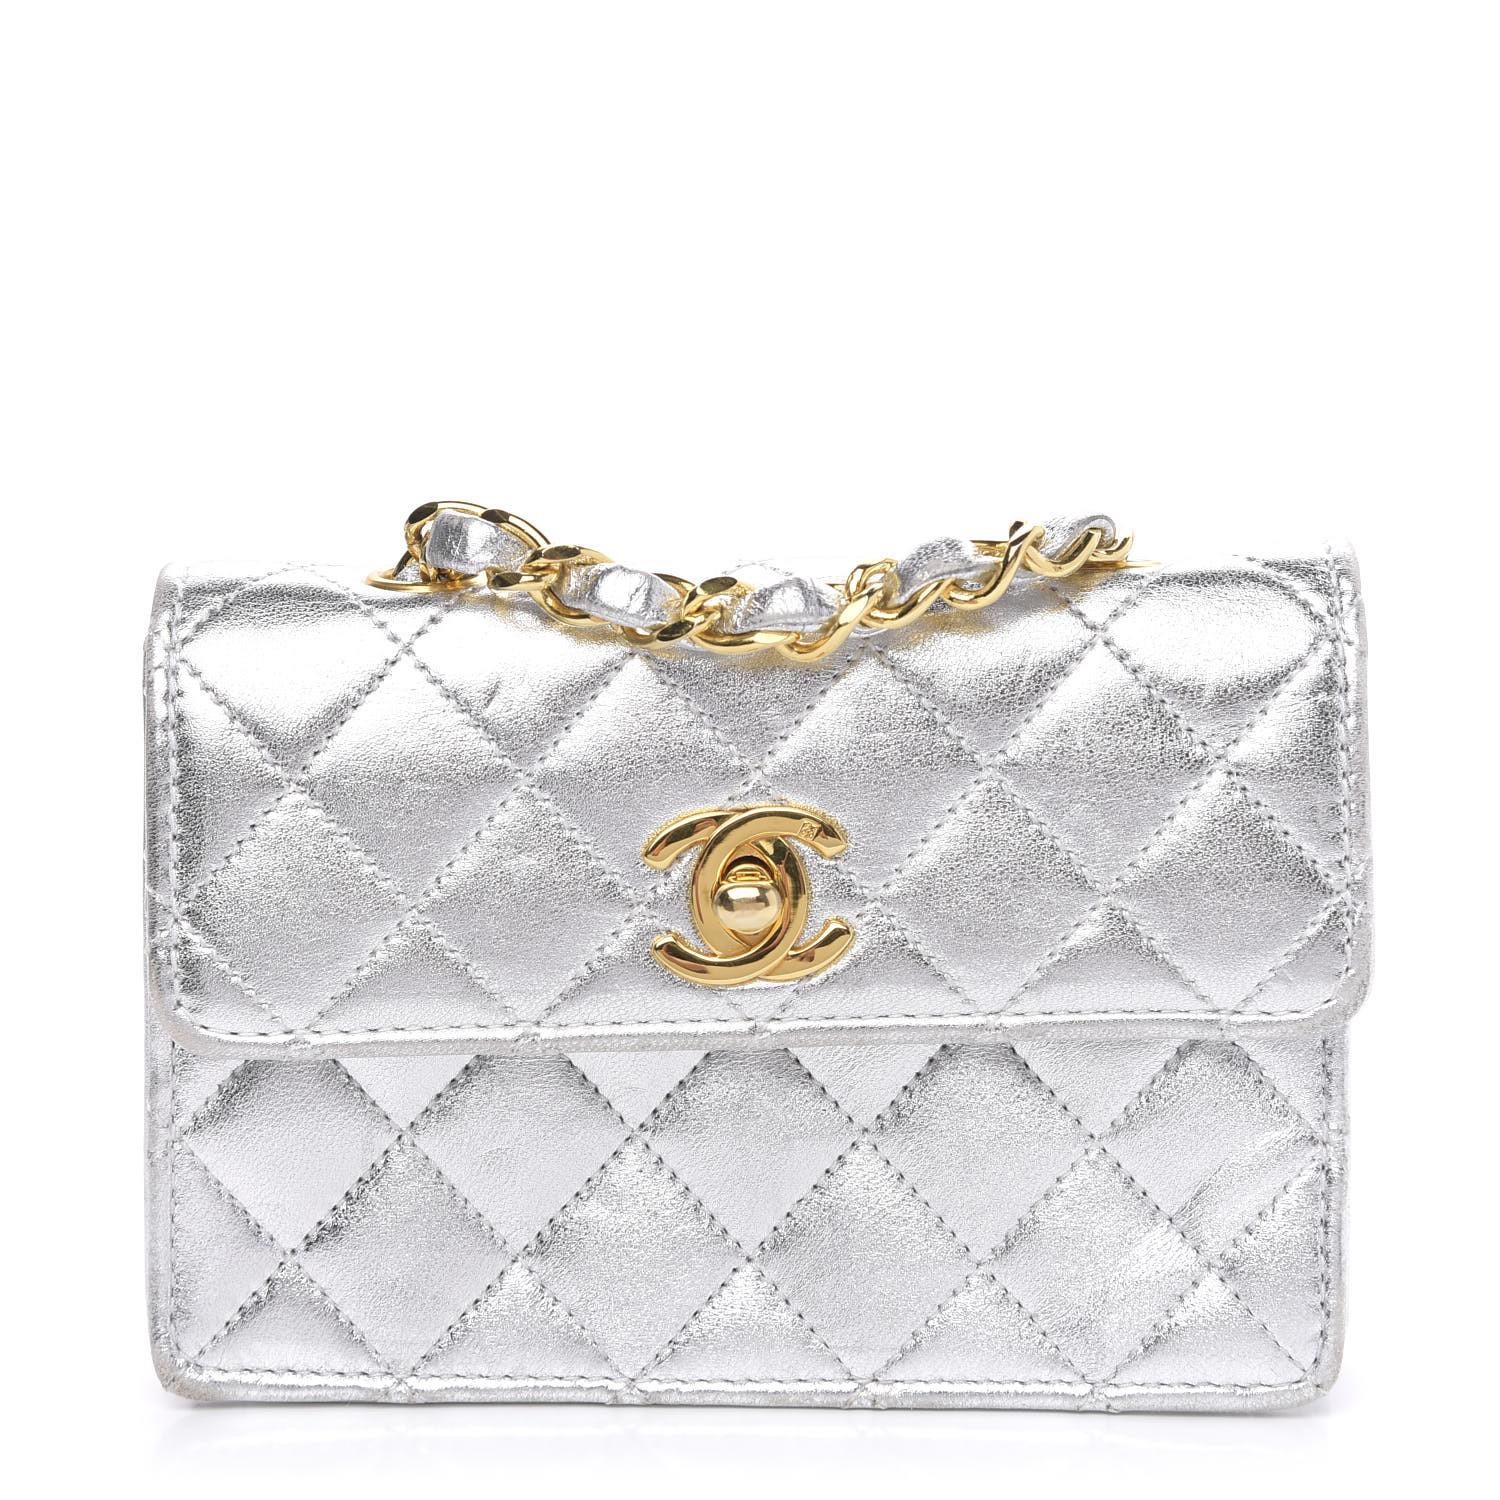 Chanel Vintage 90's Micro Mini Metallic Silver Quilted Classic Flap Bag en vente